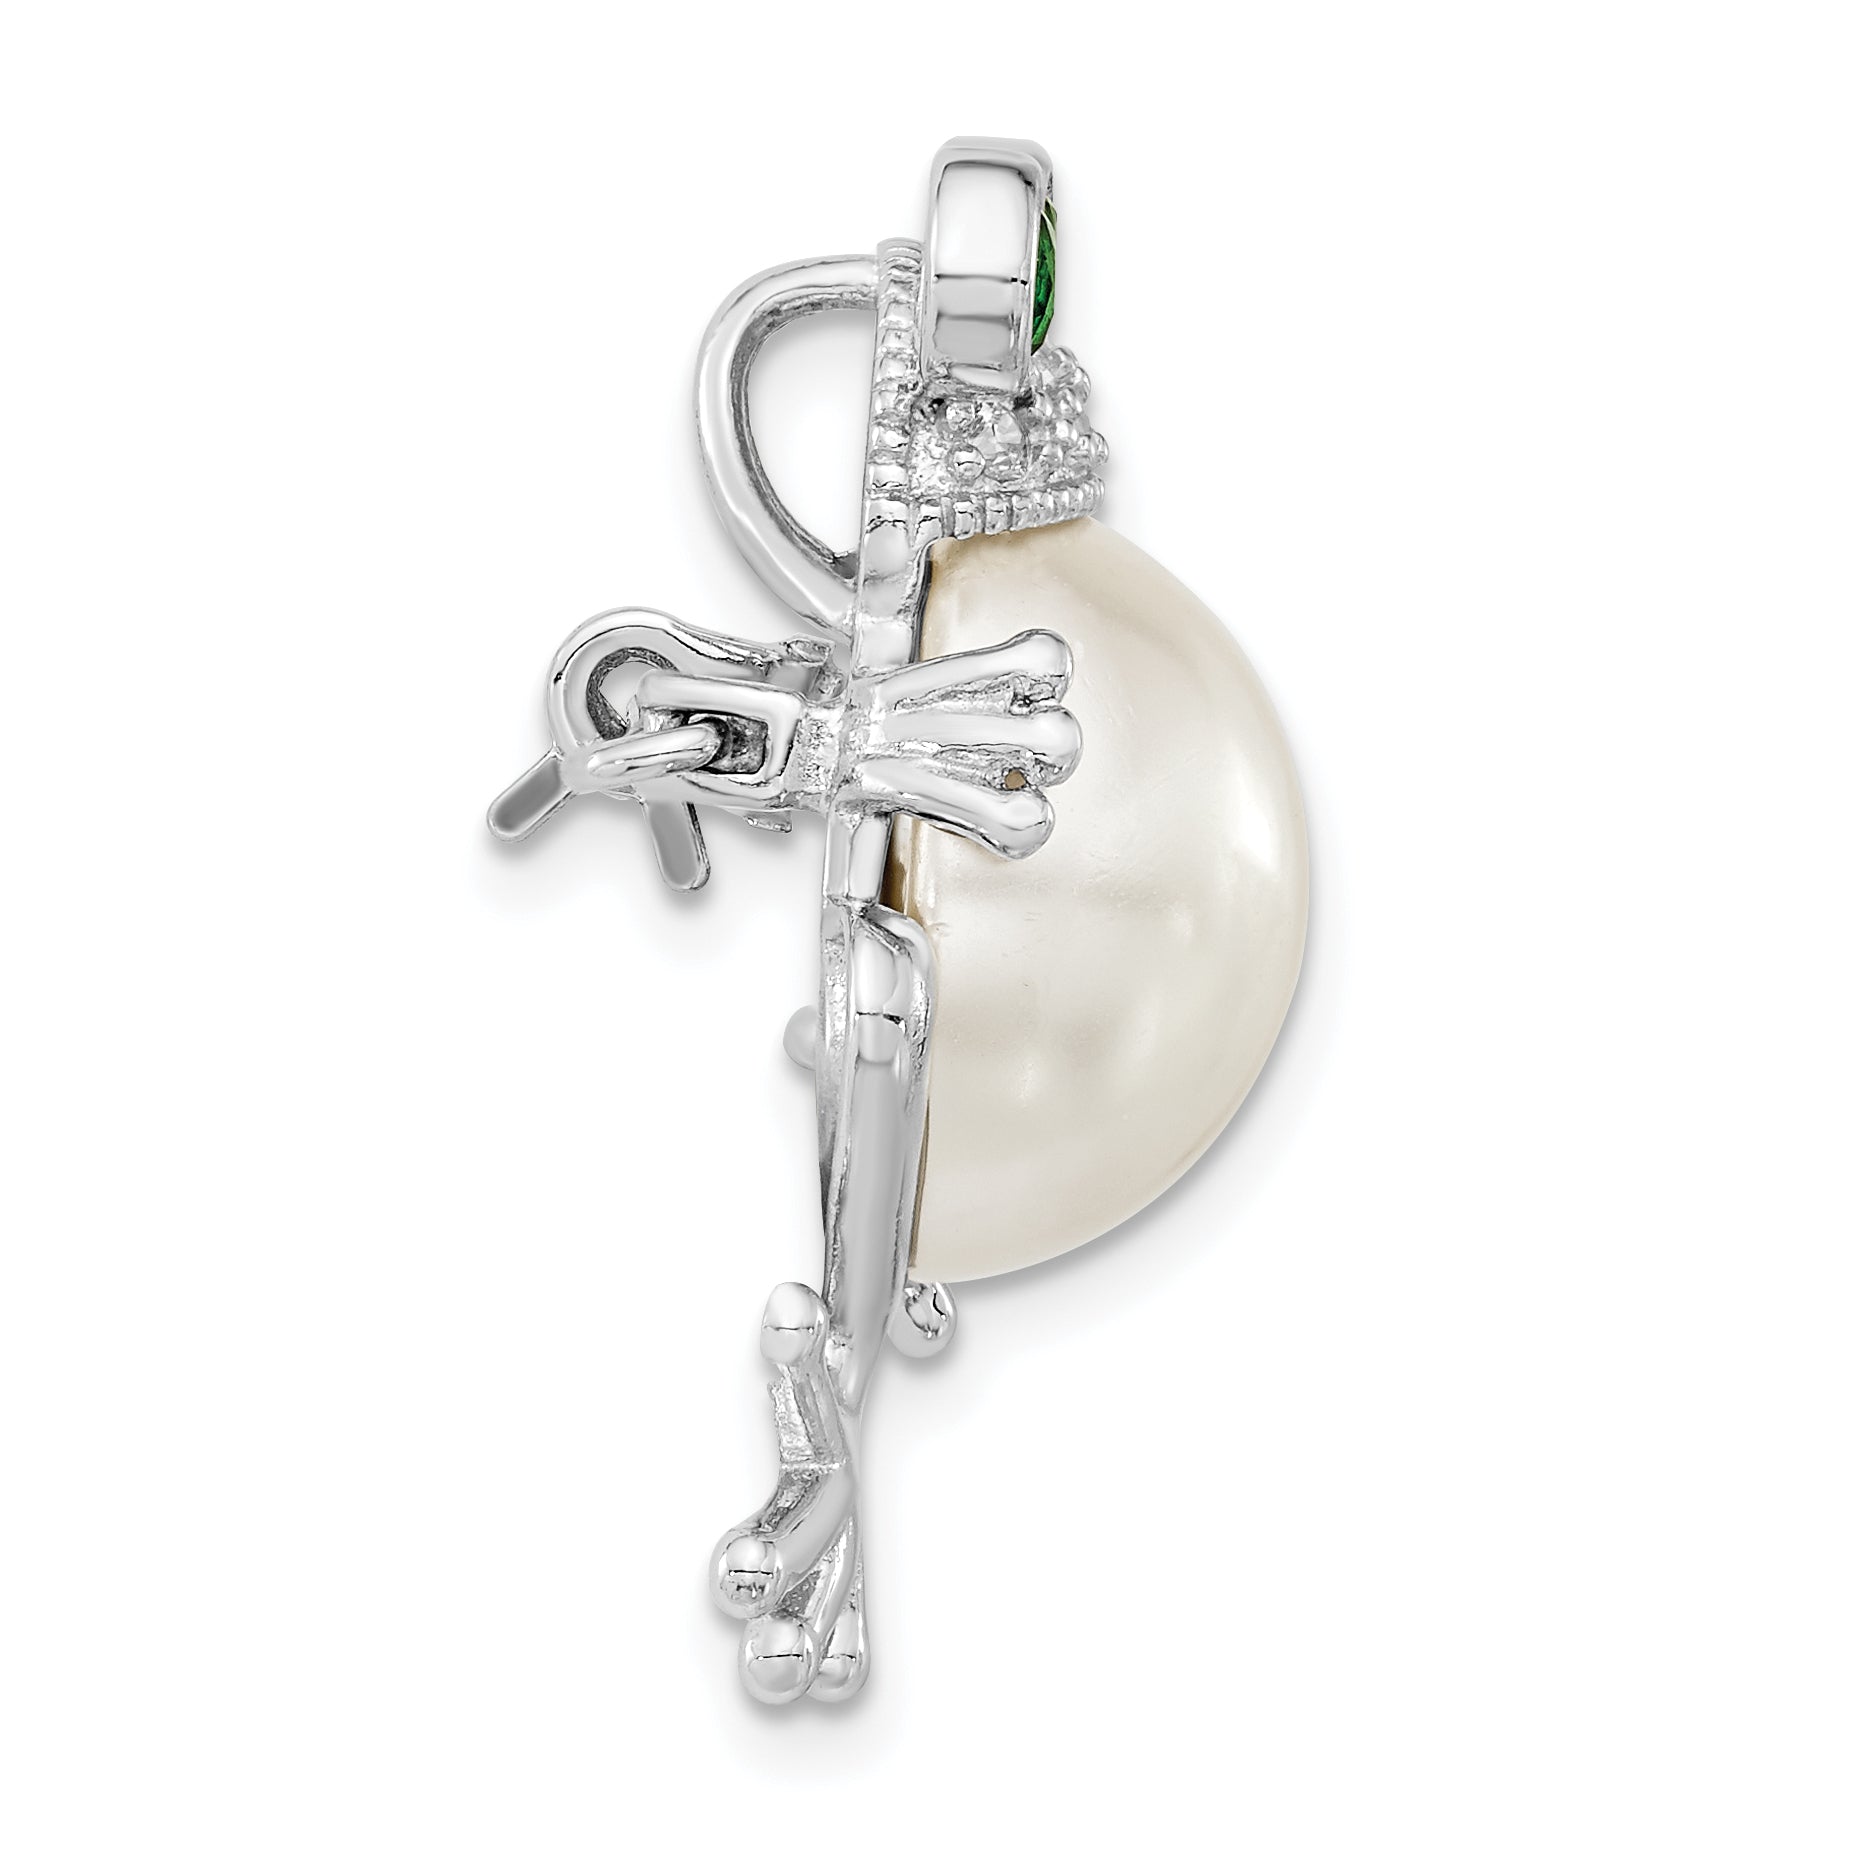 Cheryl M Sterling Silver Rhodium-plated Acrylic Pearl and Brilliant-cut Green and White CZ Frog Pin